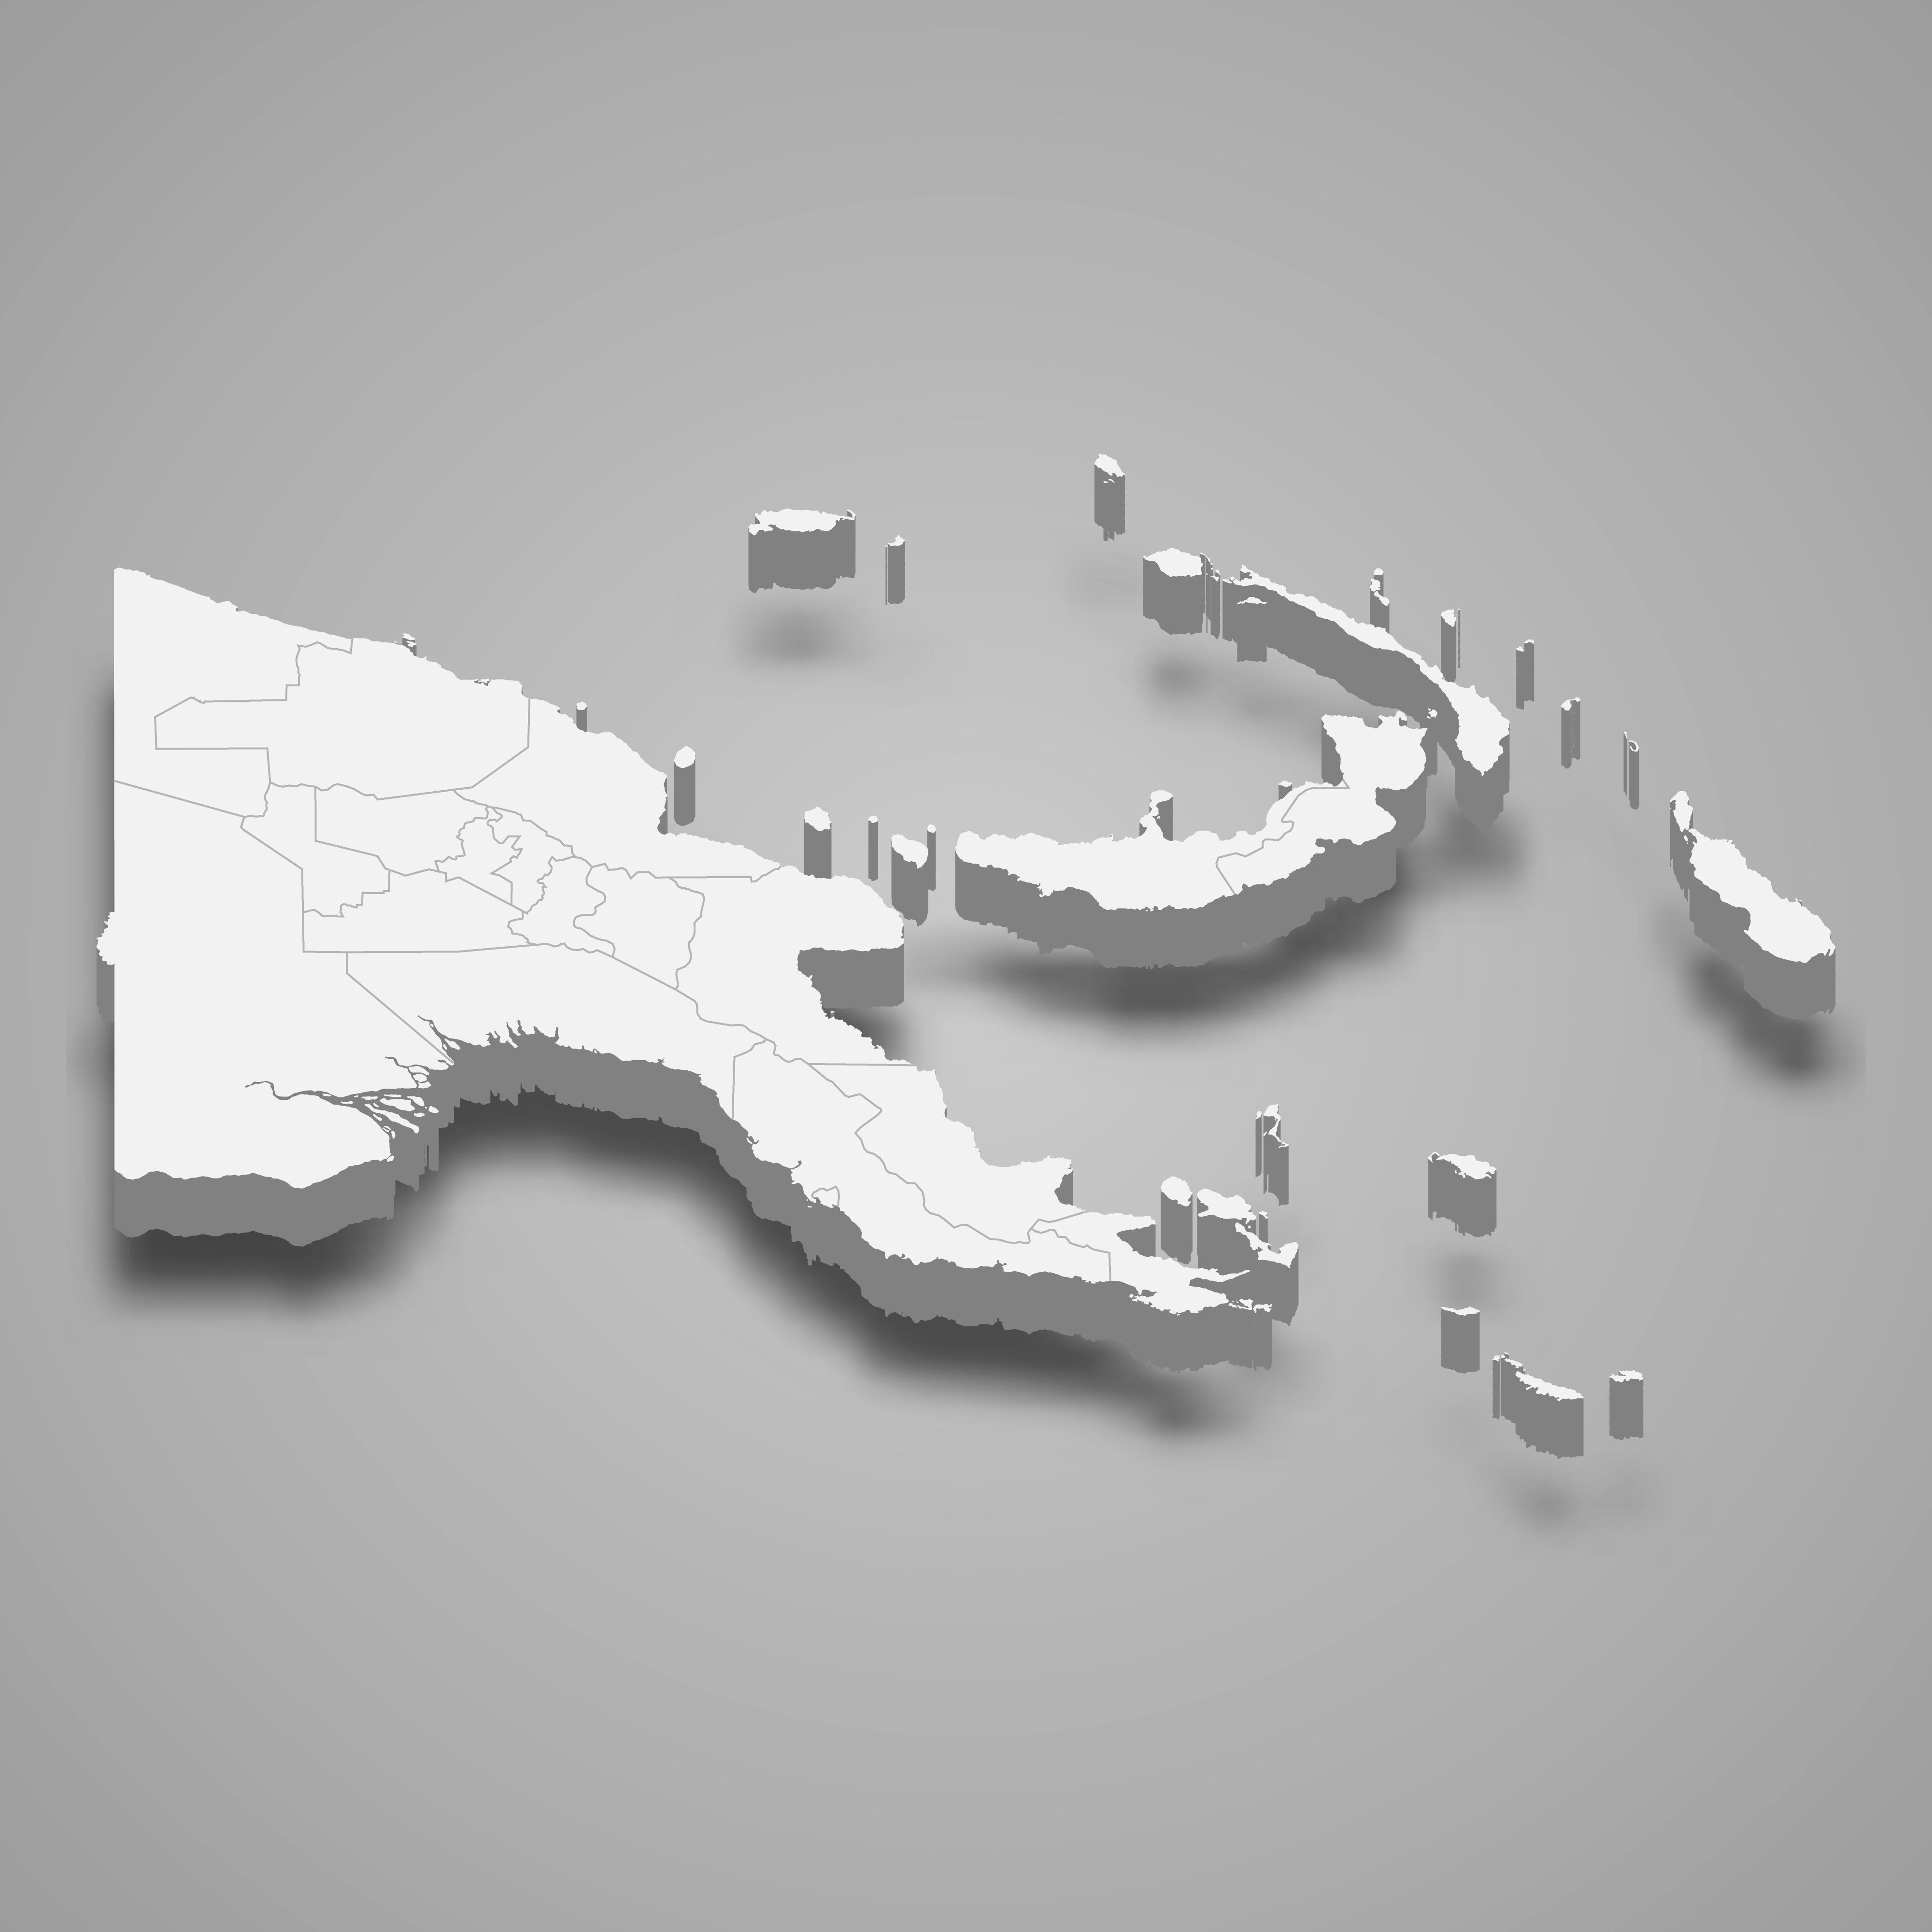 3d map of Papua New Guinea with borders of regions. 3d map with borders Template for your design